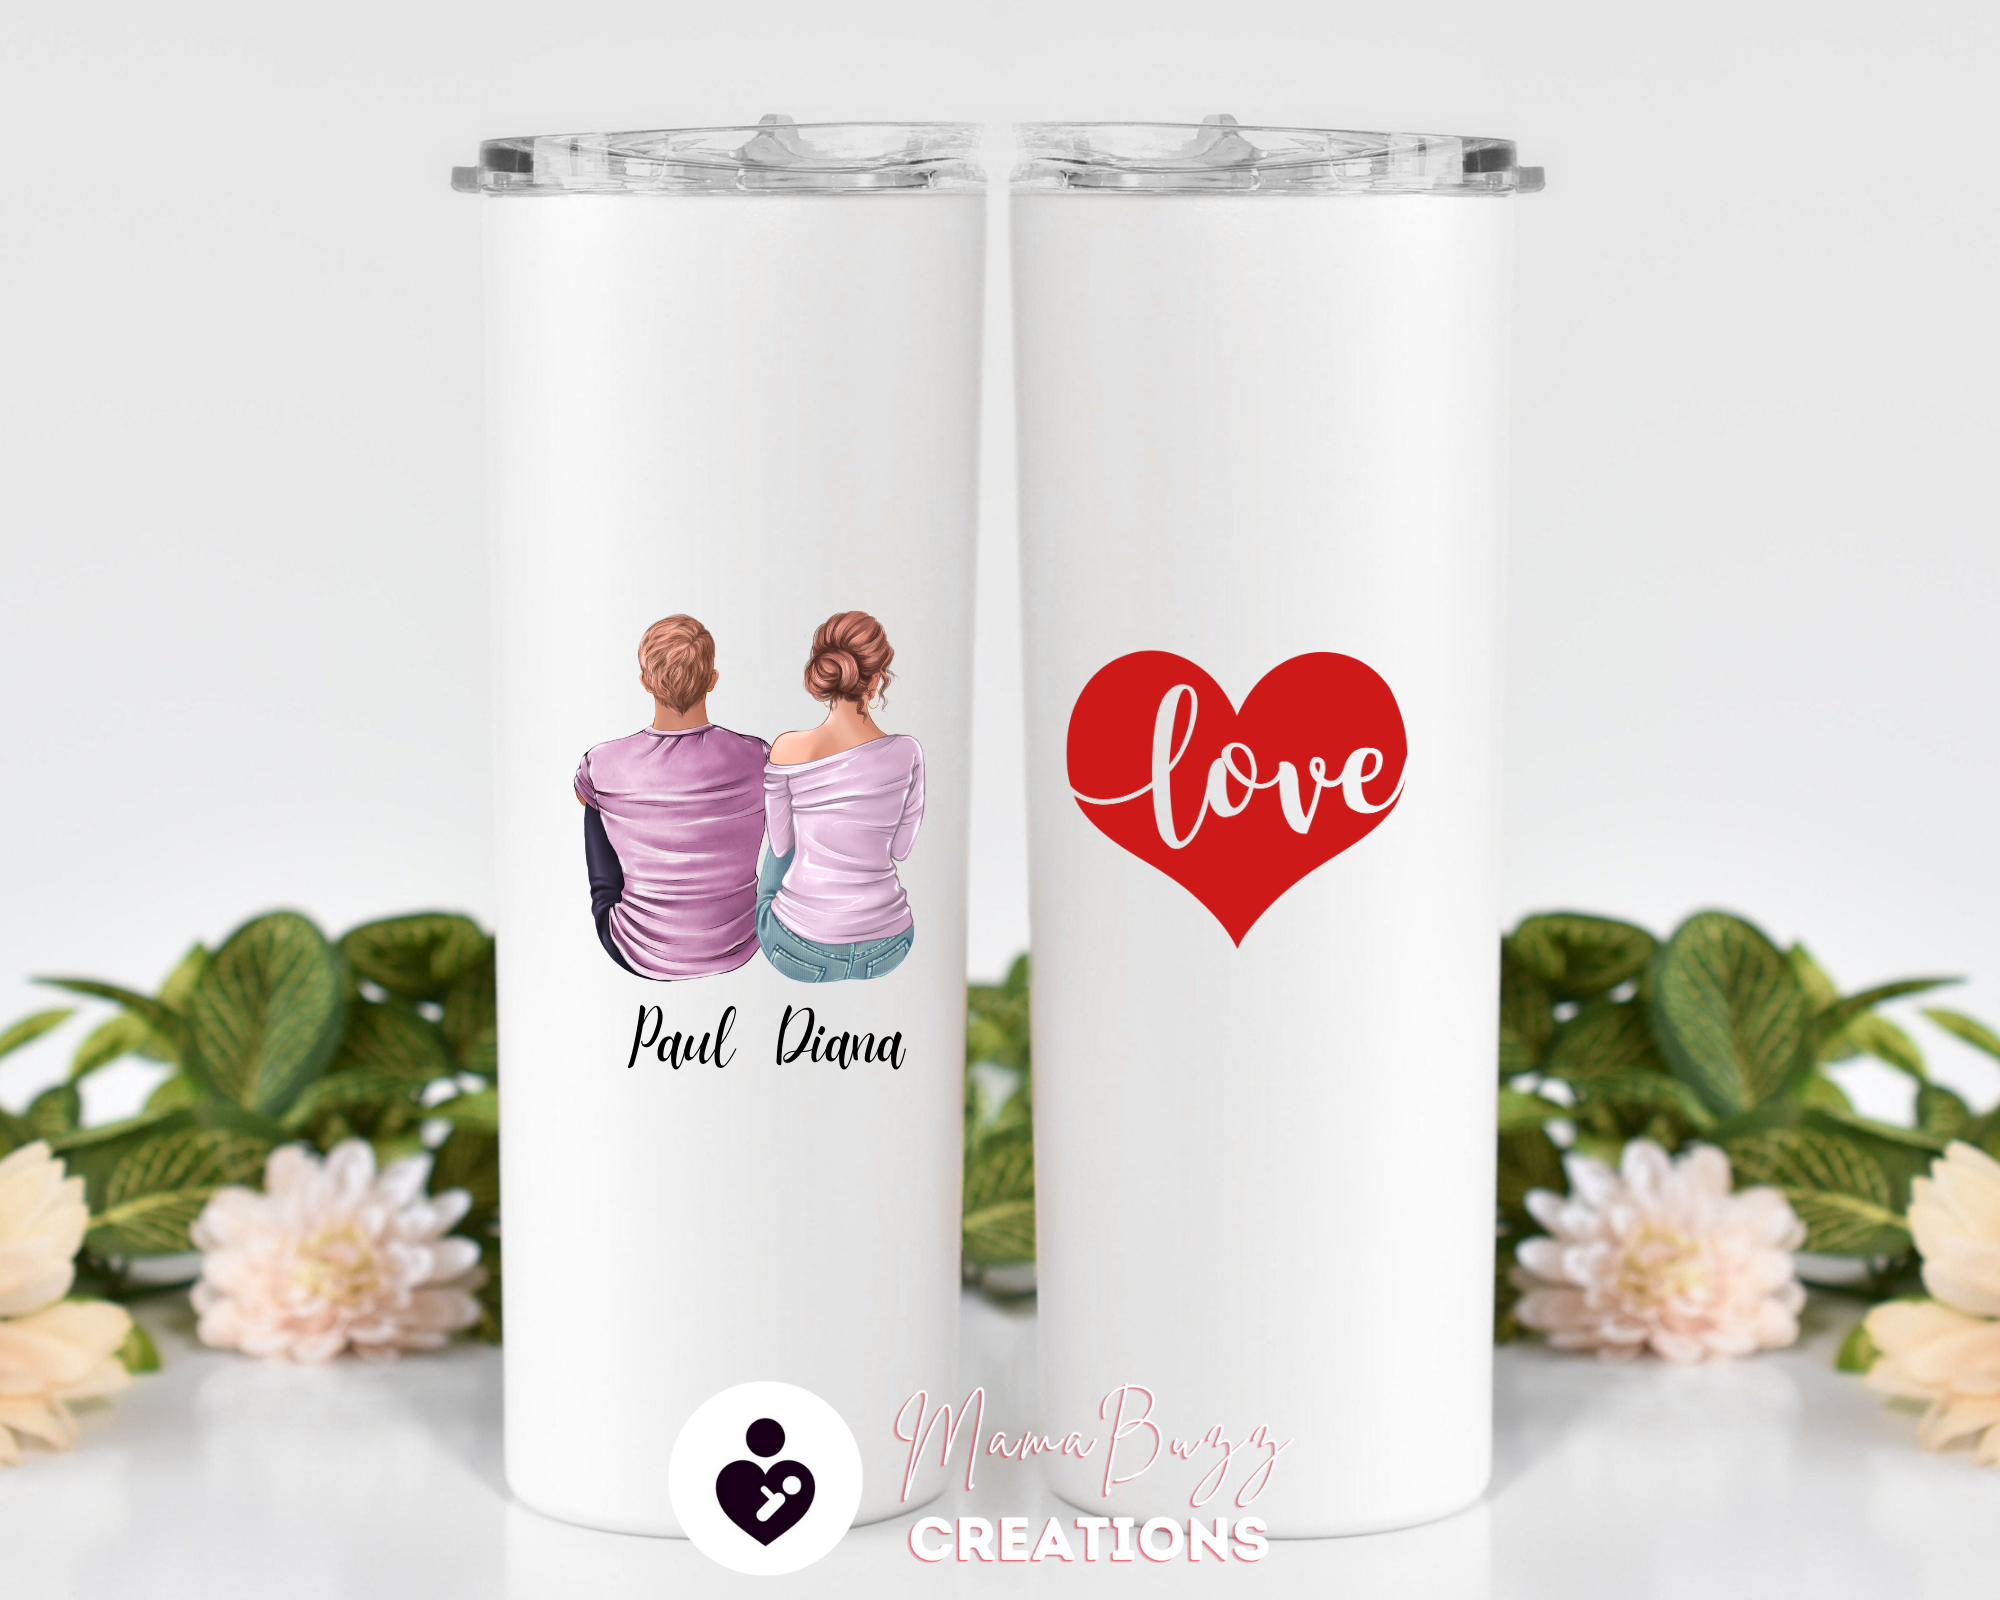 Valentine Gift Ideas,Valentine’s Day Gift For Men,Valentine’s Day Gift For Her,Valentines Day Gifts,Valentines Gifts For Him,Couples Gifts - MamaBuzz Creations